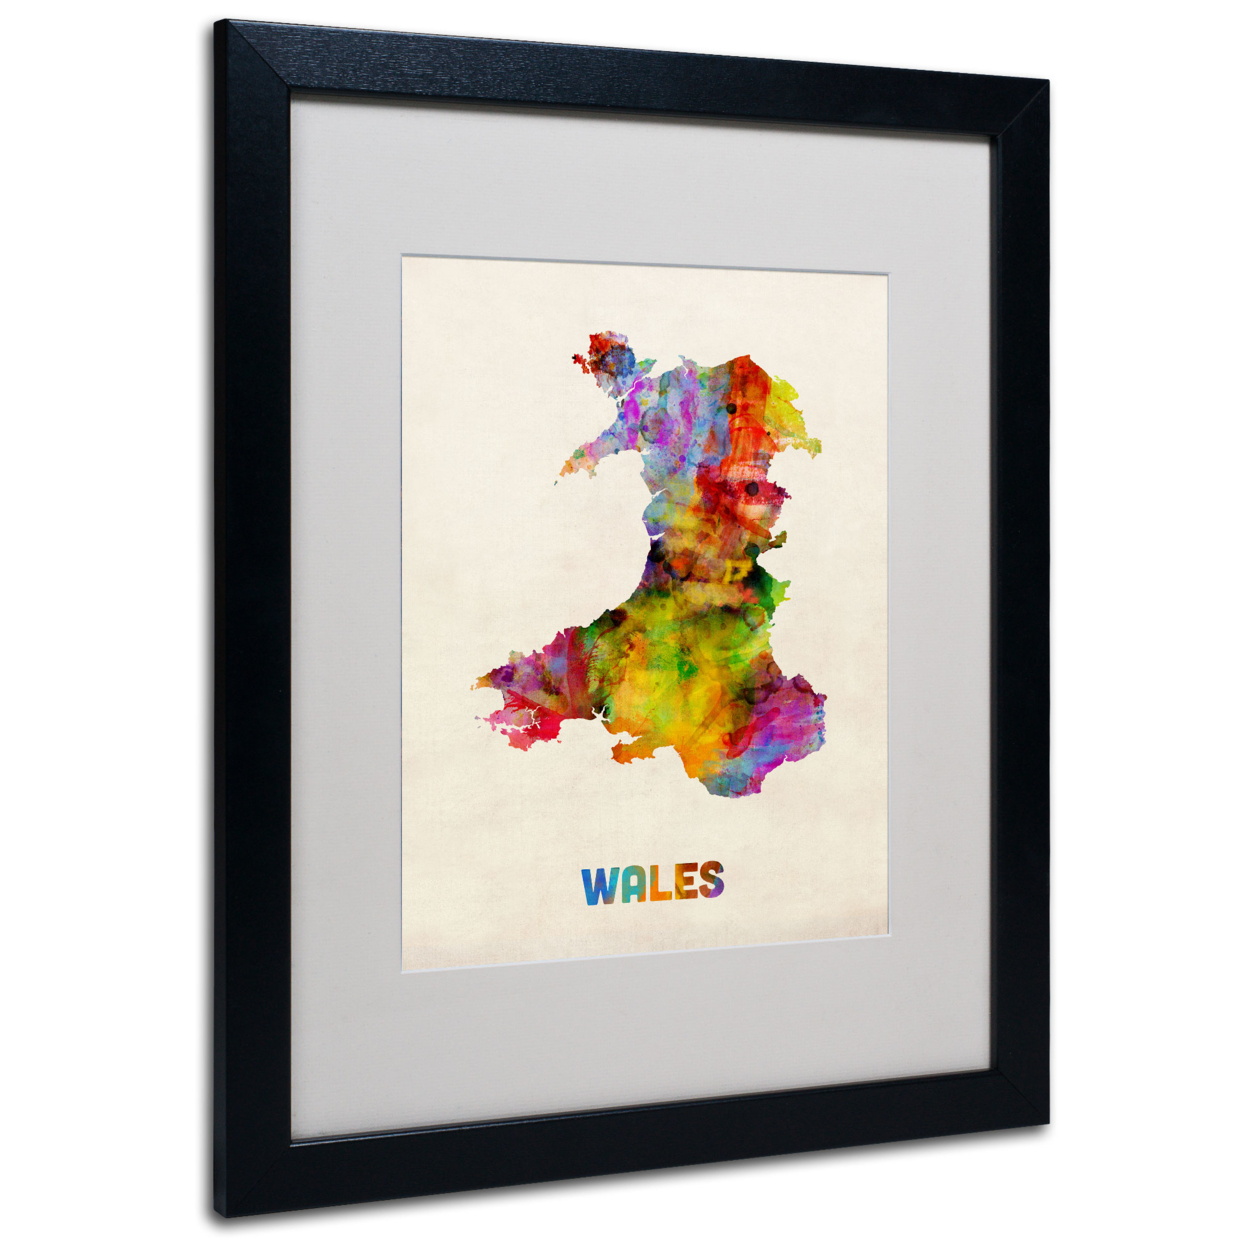 Michael Tompsett 'Wales Watercolor Map' Black Wooden Framed Art 18 X 22 Inches